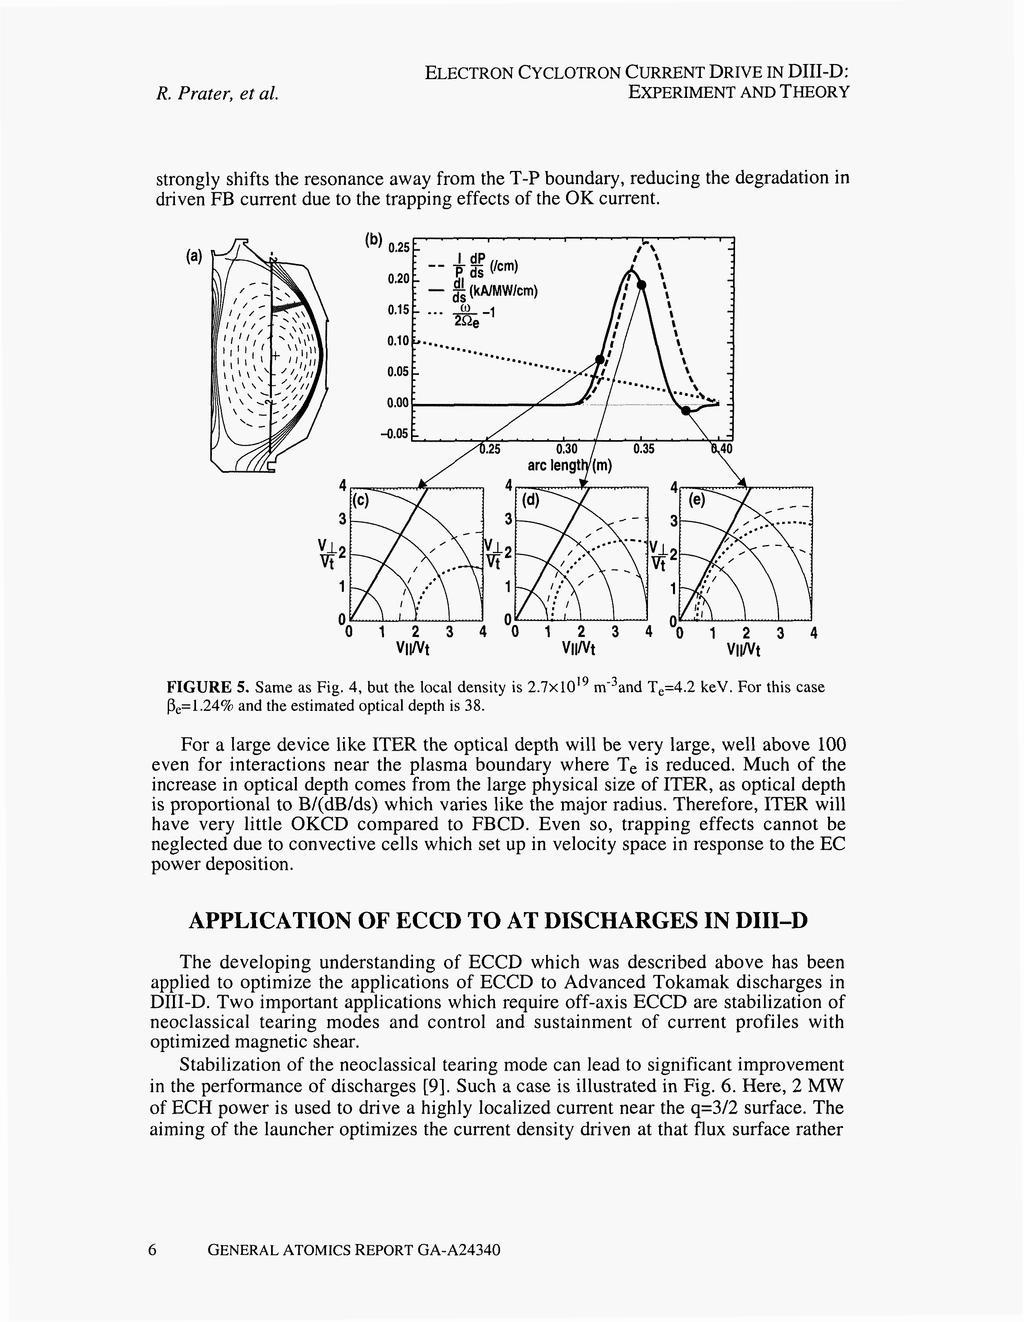 ELECTRON CYCLOTRON CURRENT DRVE N D-D: EXPERMENT AND THEORY strongly shifts the resonance away from the T-P boundary, reducing the degradation in driven FB current due to the trapping effects of the